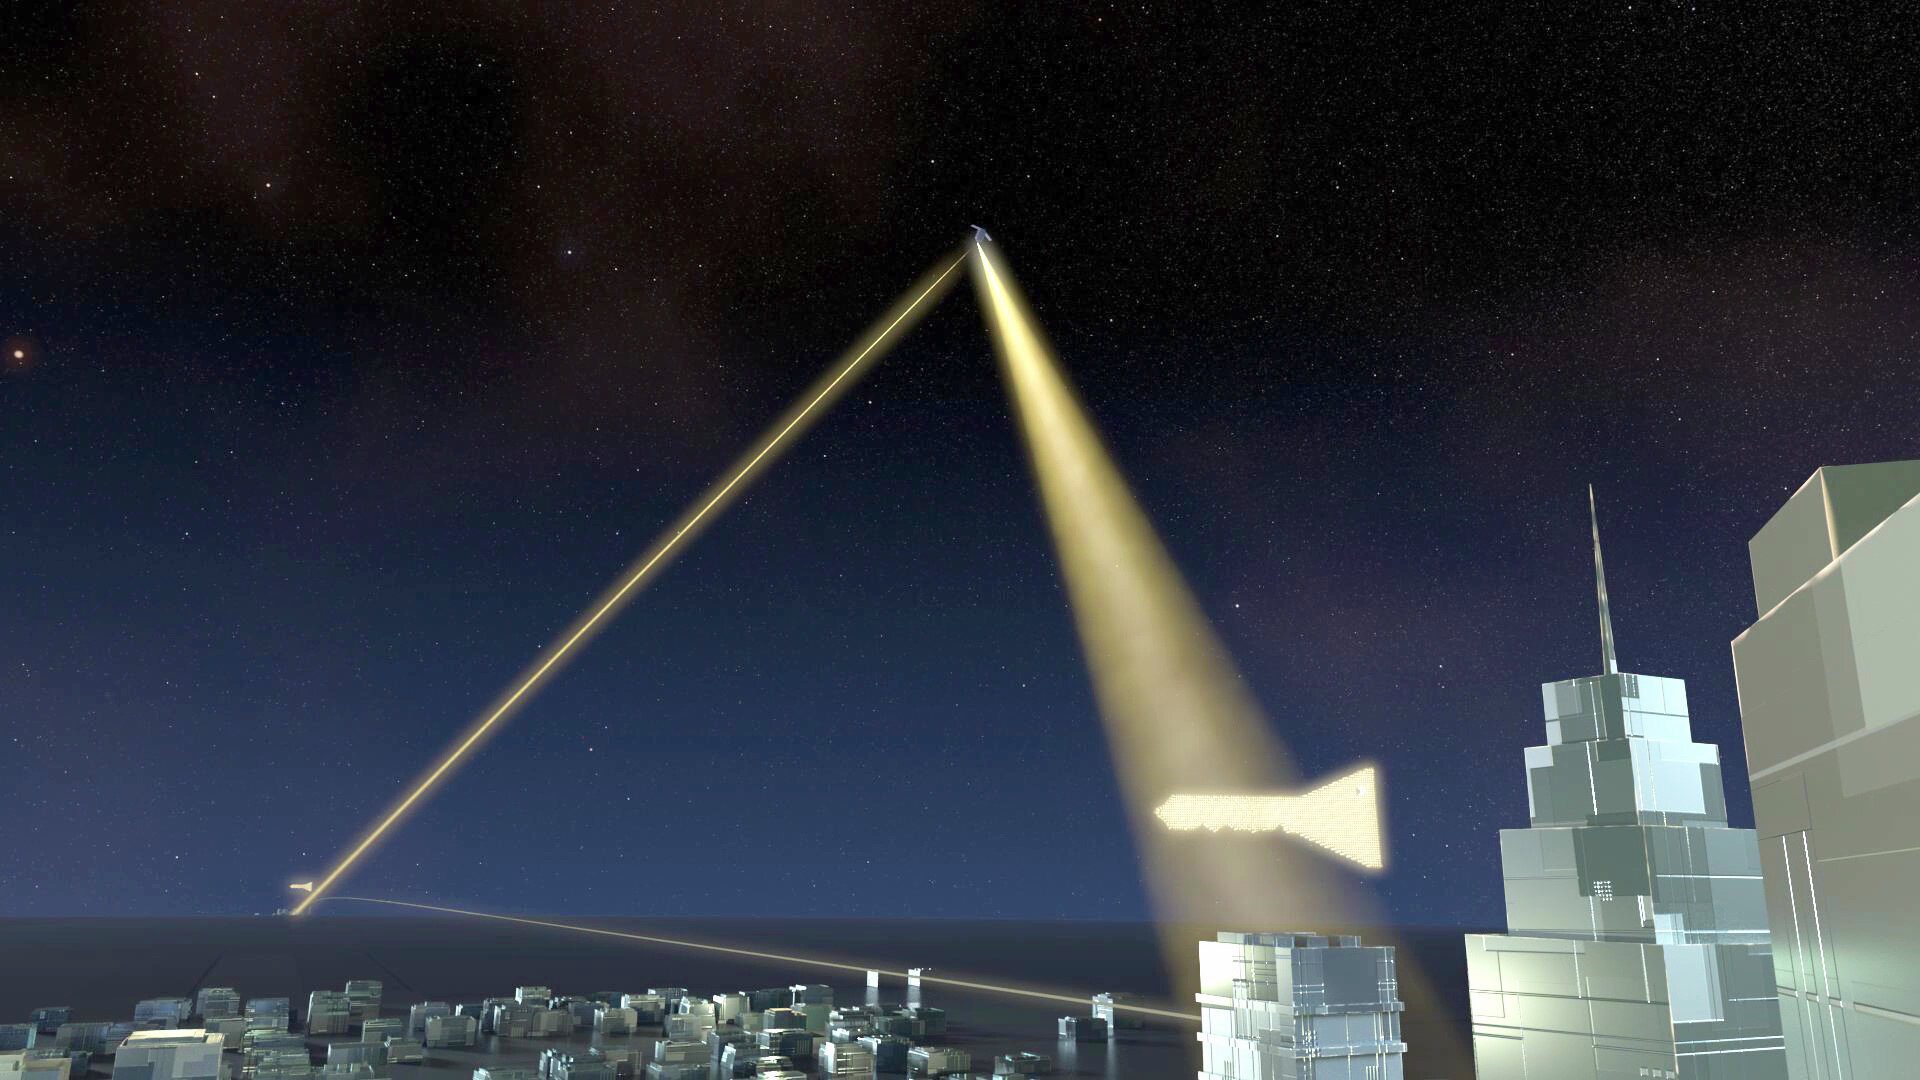 The proposed satellite quantum communication systems would have pan-European reach